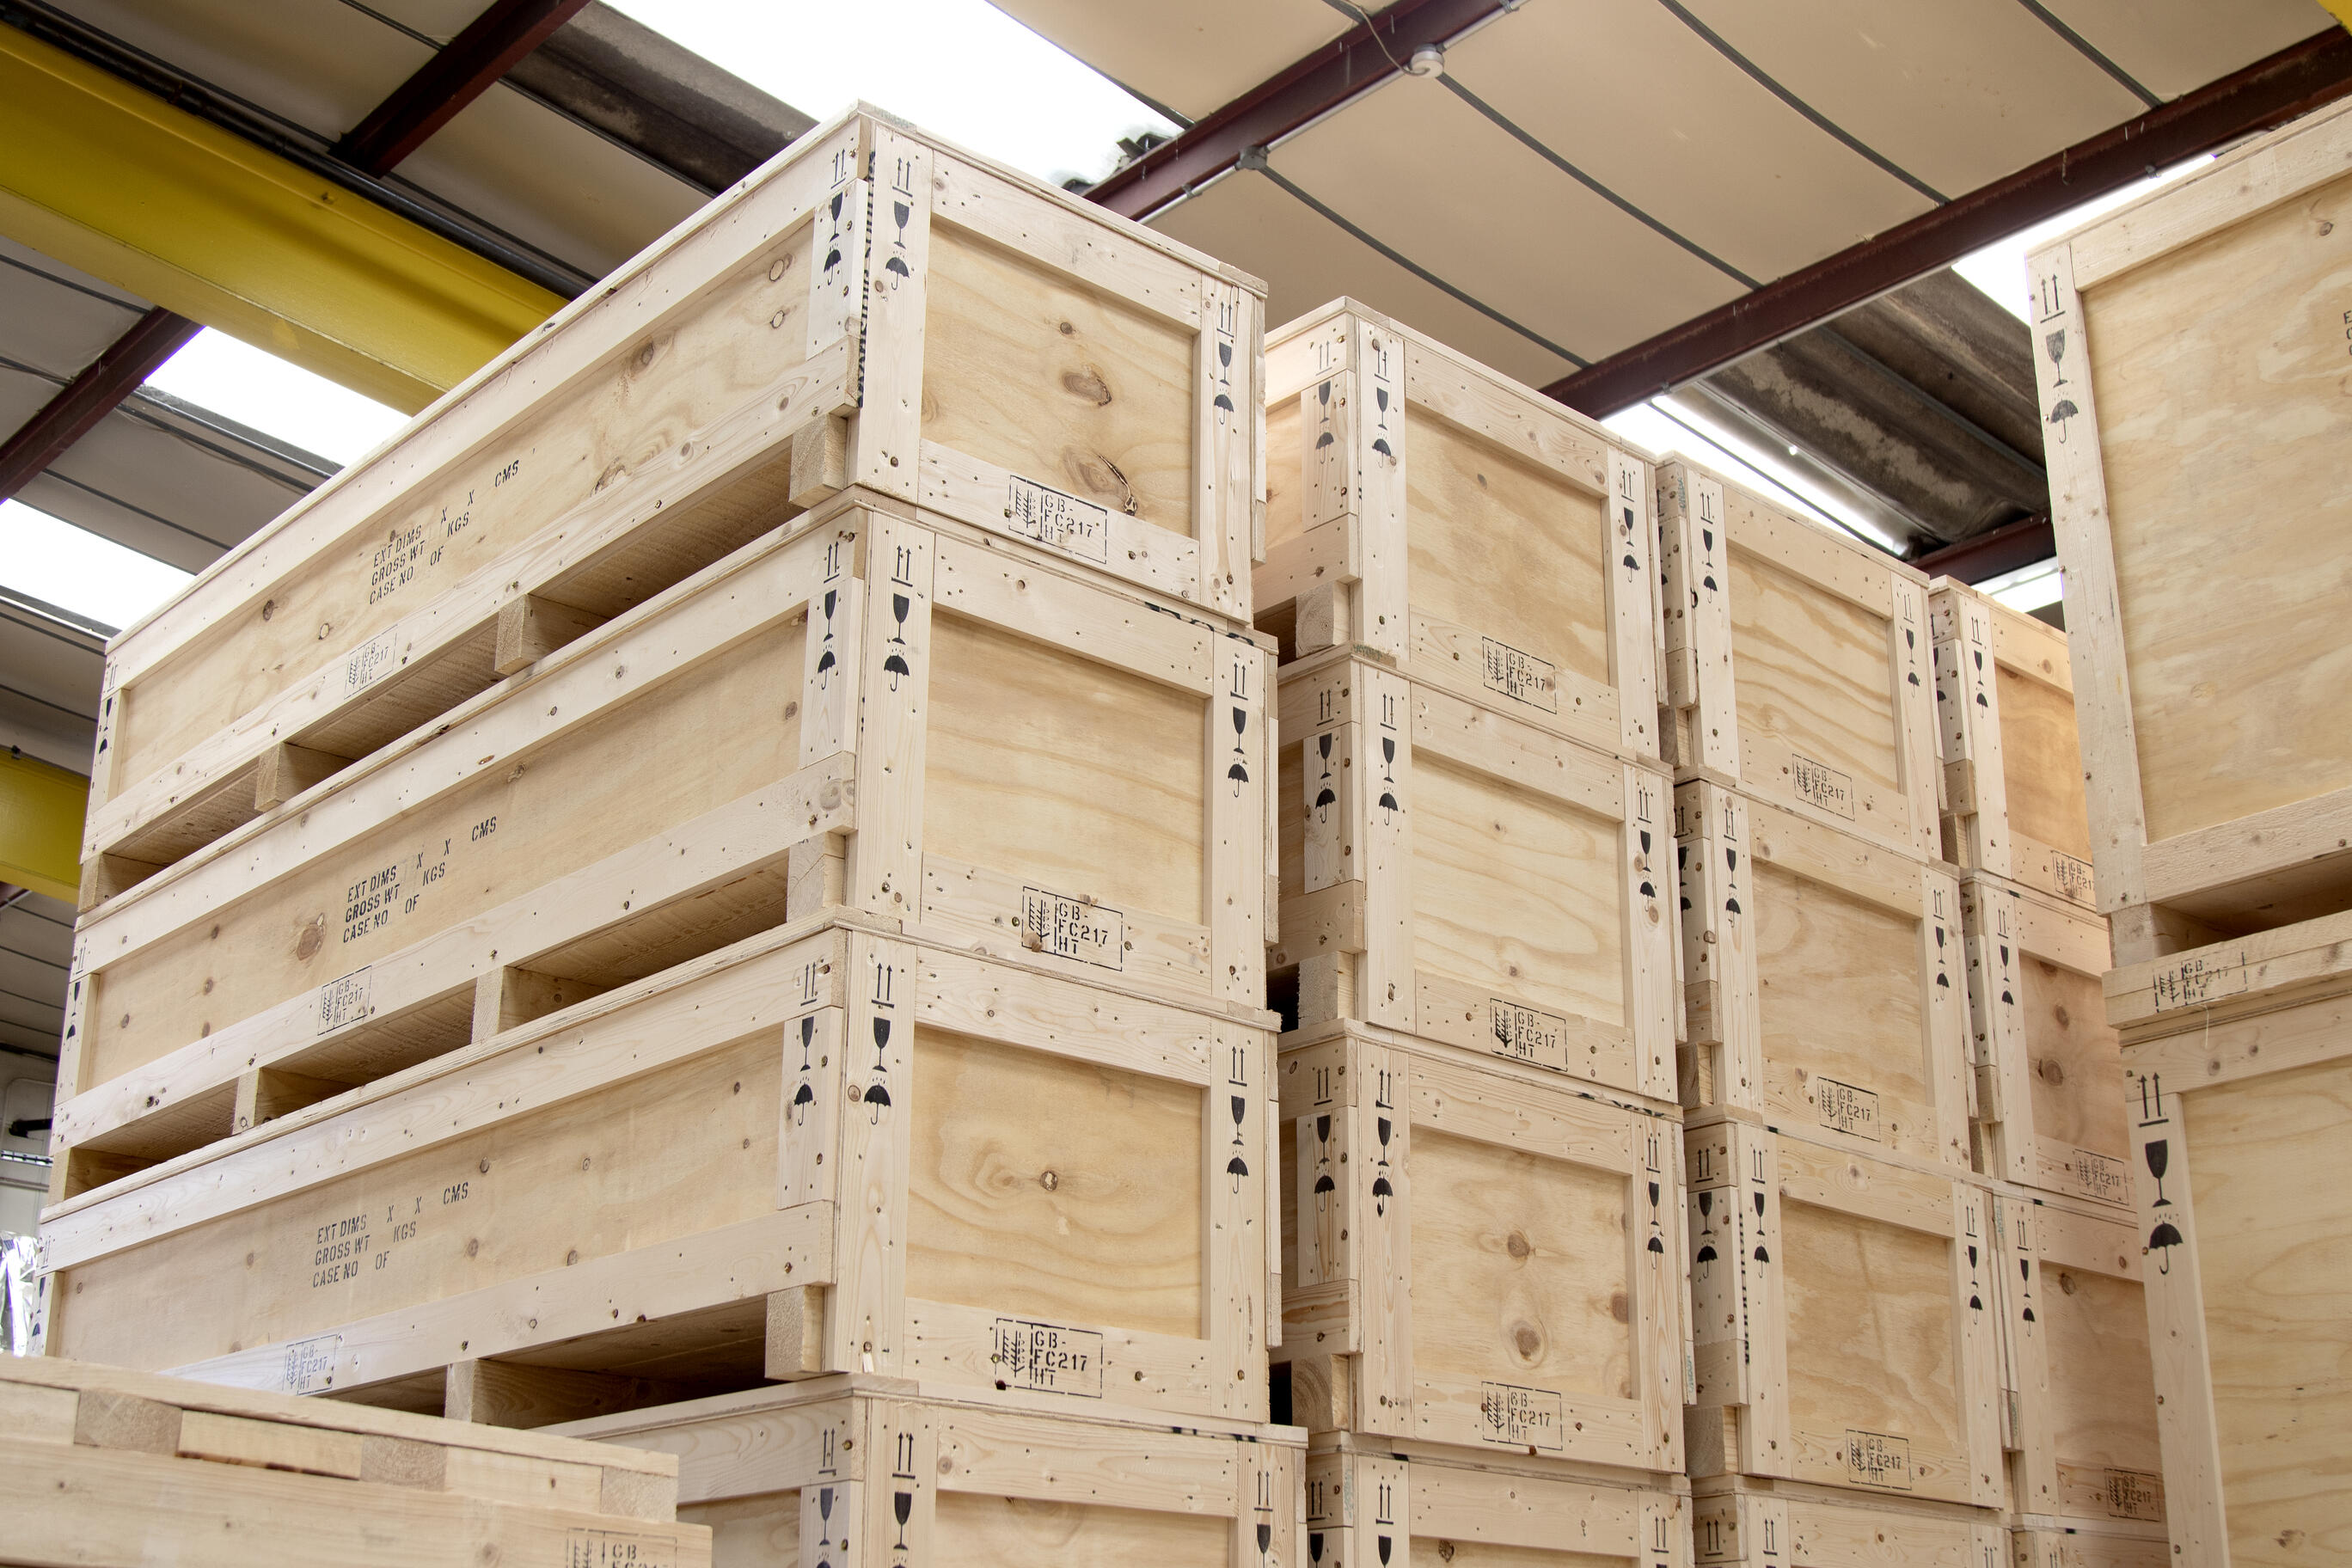 Made to order Export Packing Crates